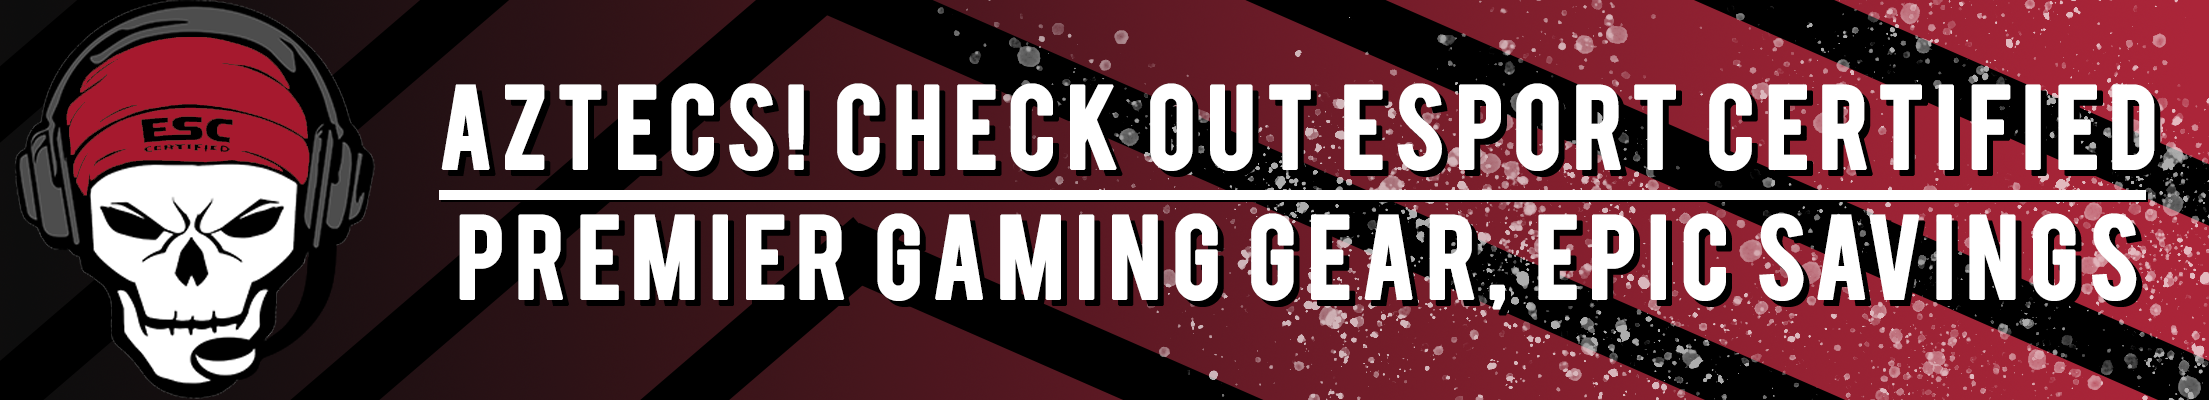 Aztecs! Check Out Esport Certified Premier Gaming Gear, Epic Savings.